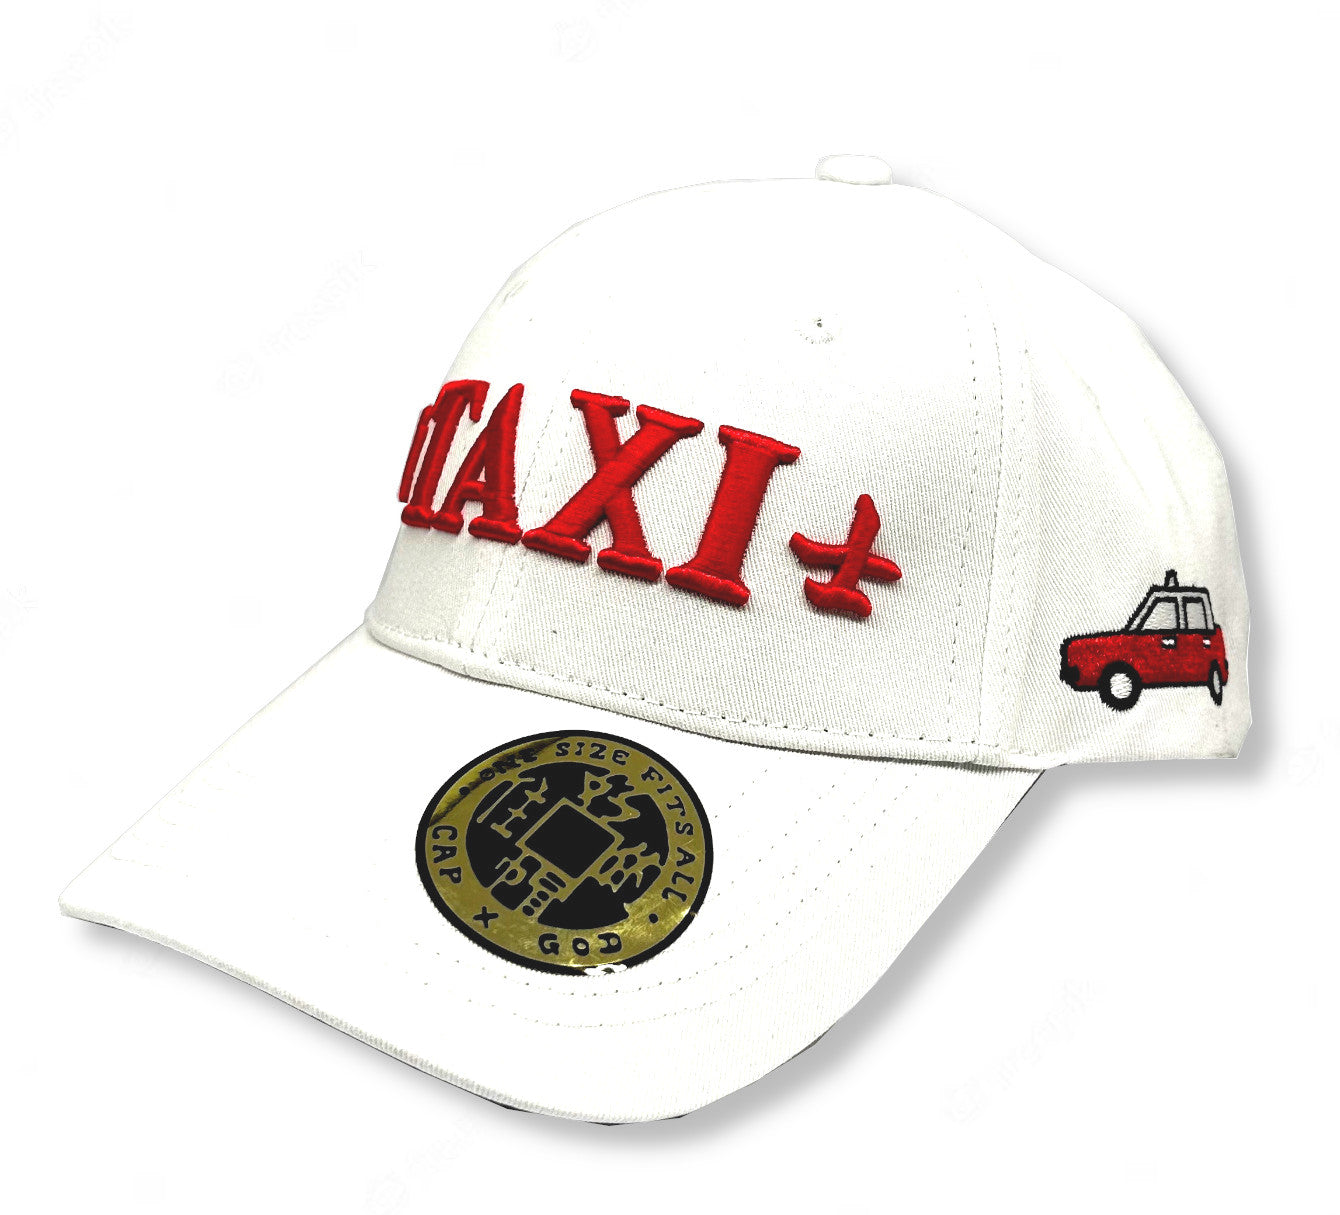 'TAXI' 3D Baseball Cap, White/Red